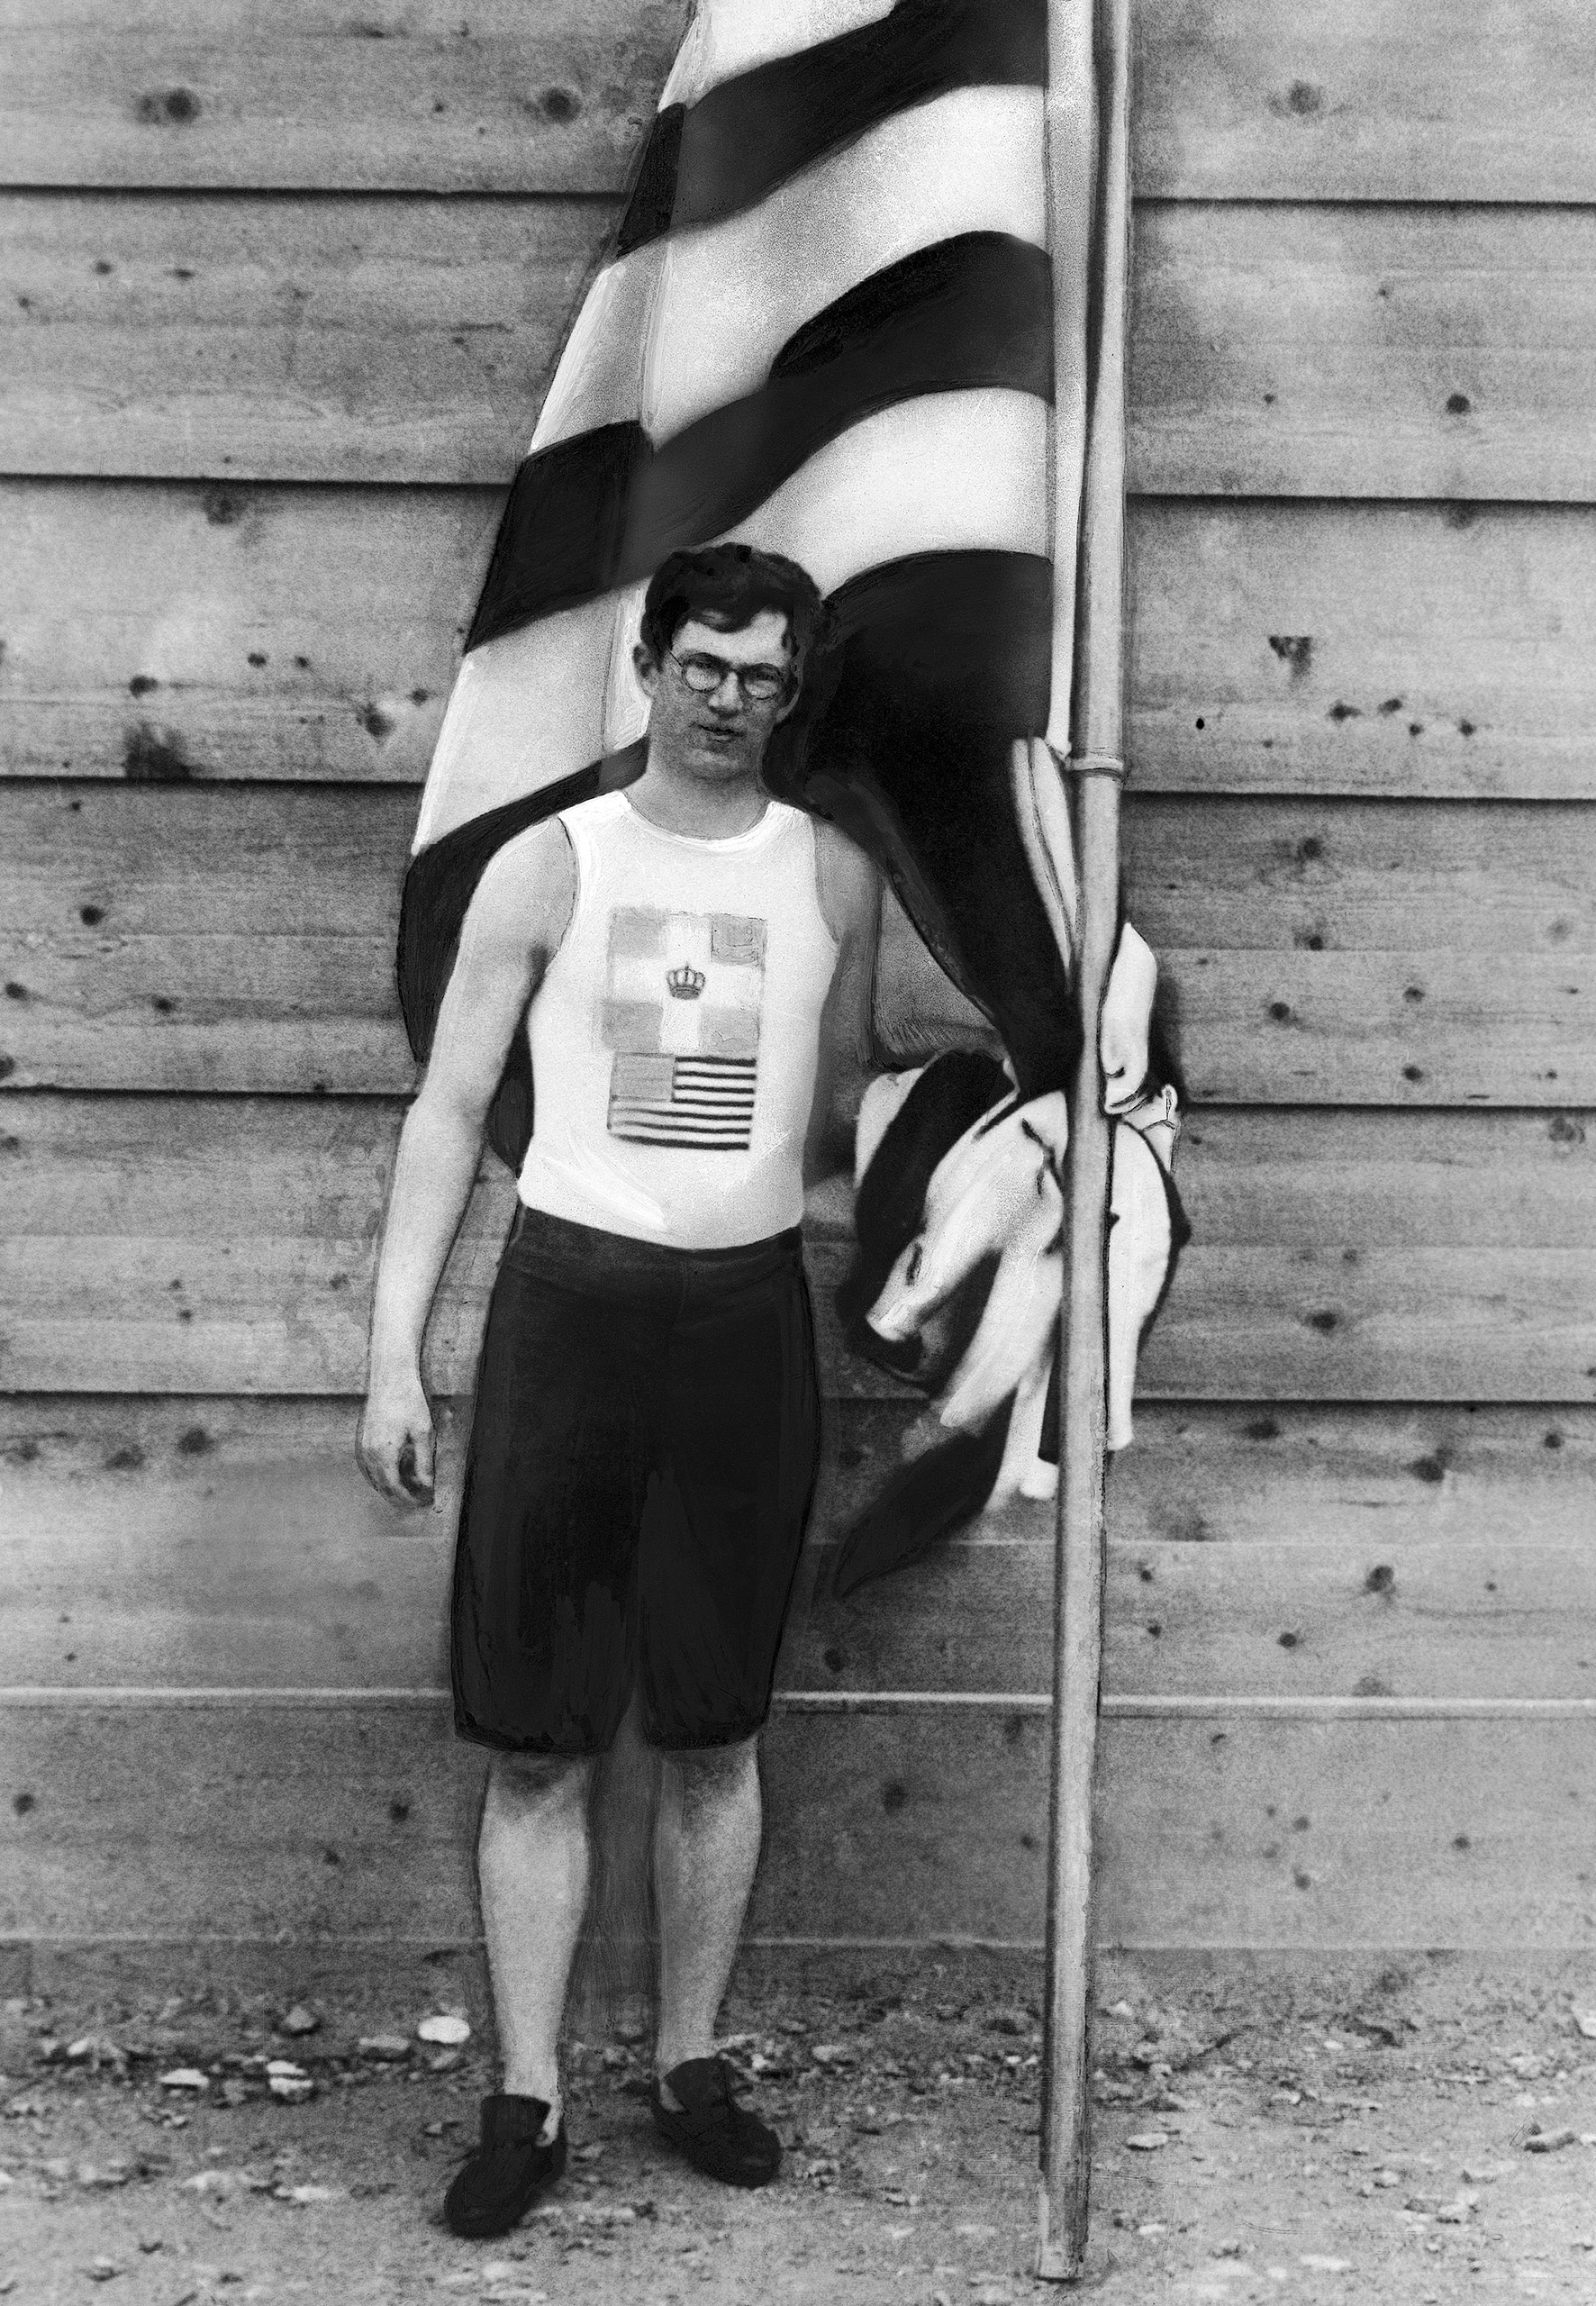 Harvard student Ellery Harding Clark from Boston, USA, poses with a flag at the first modern International Summer Olympic Games held at the Panathinaiko Stadium on April 7, 1896 in Athens, where he won the gold medal both in high jump (2.81 meters) and long jump (6.35 meters).